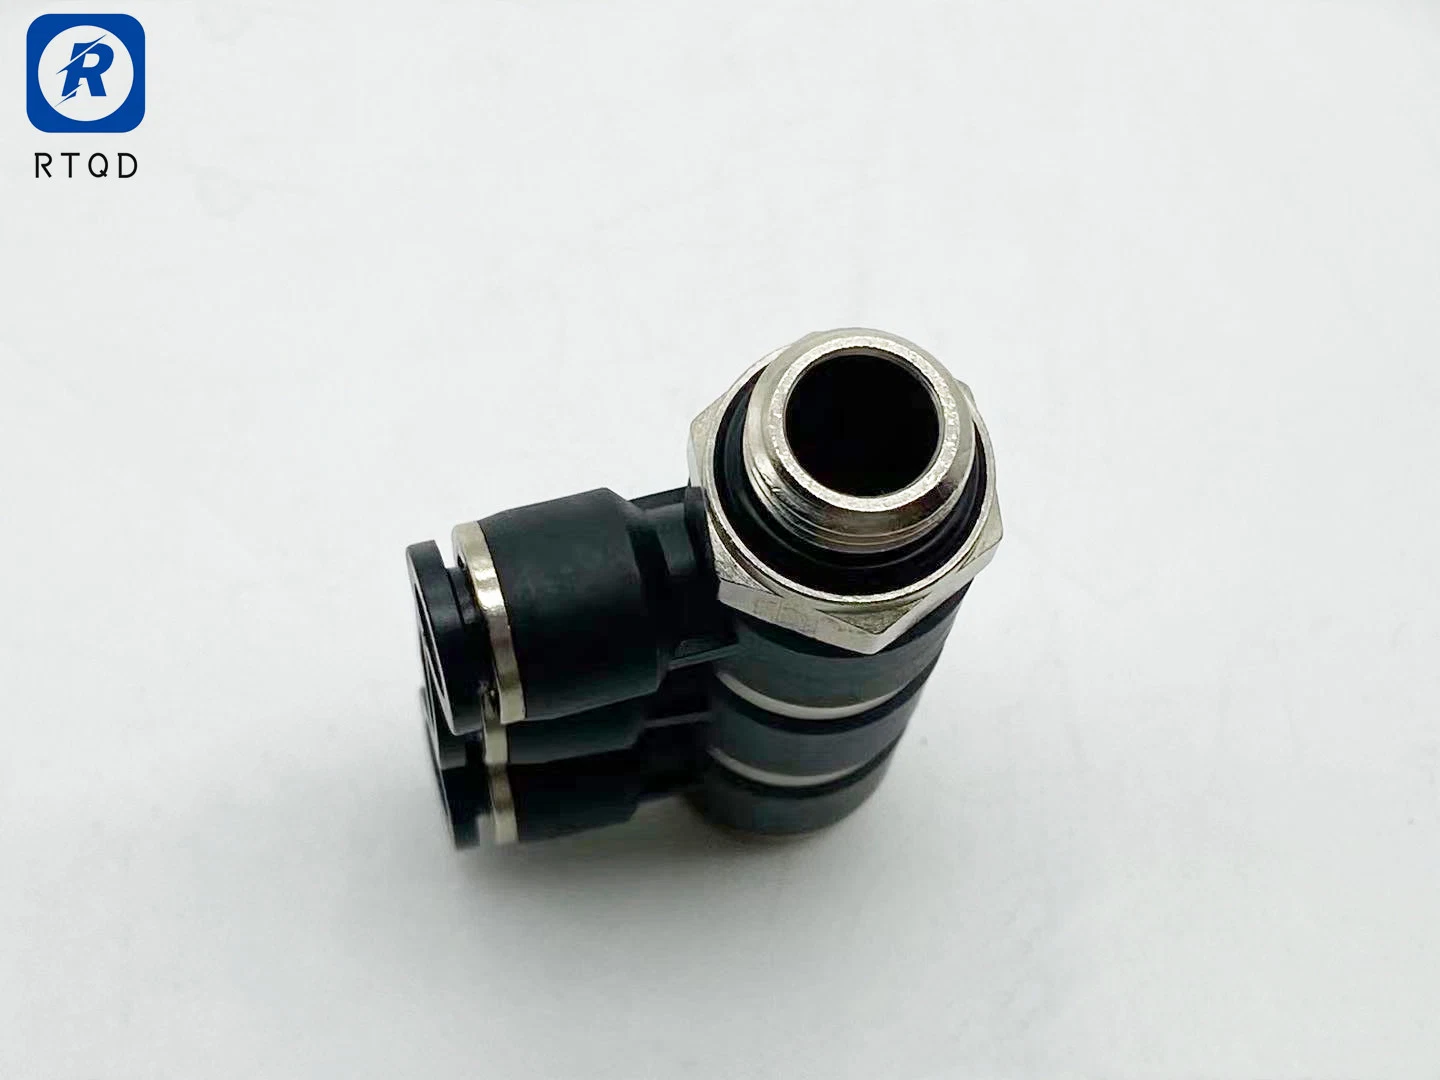 Pneumatic Double Male Elbow Connector Air Pipe Fitting Pneumatic Components Triple Universal Male Elbow Joint Connector Kq2vt Kq2vd Series